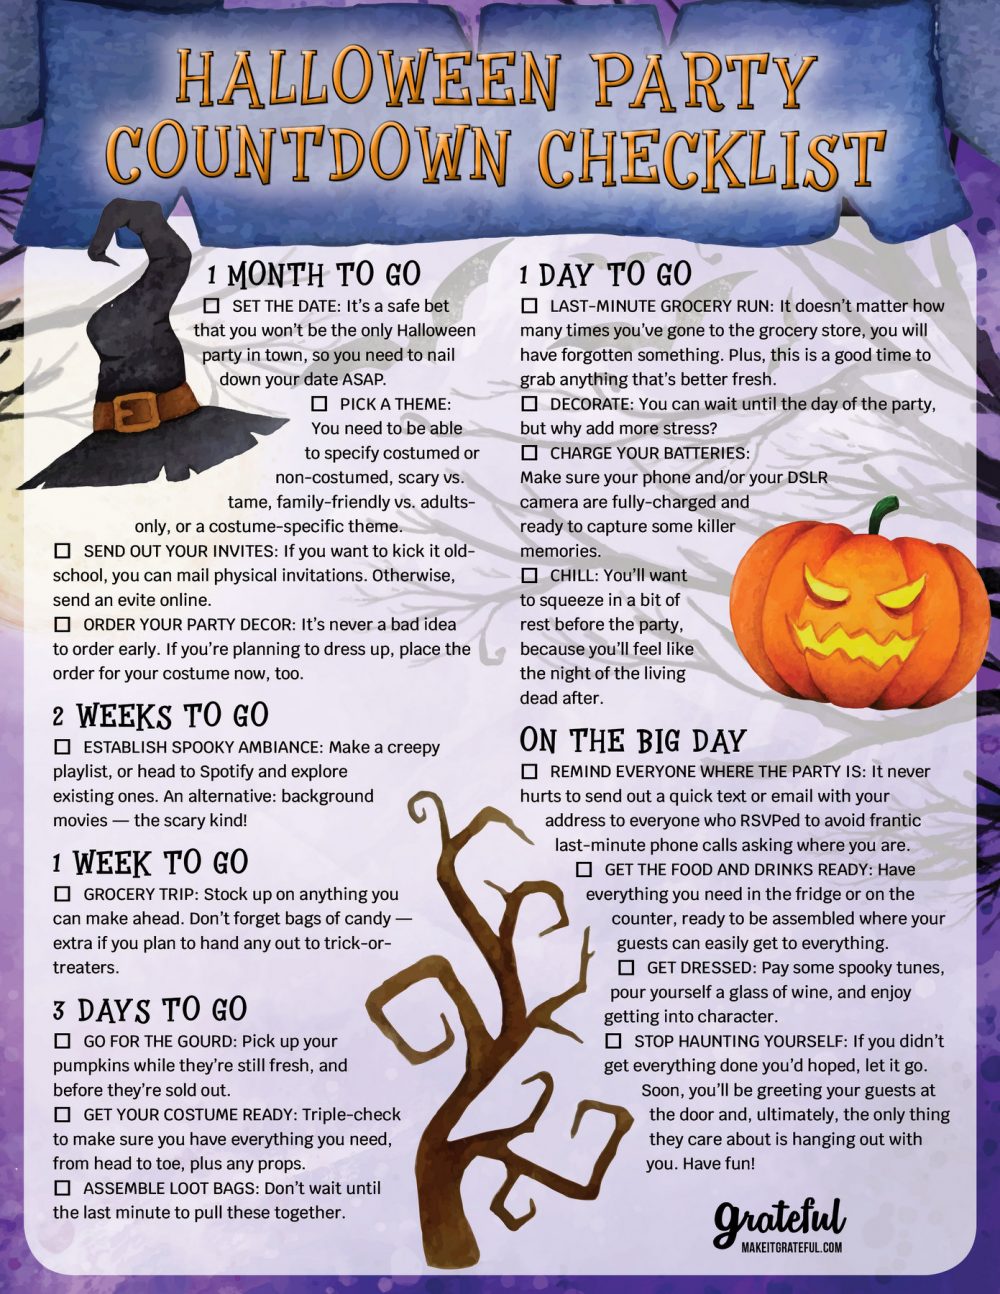 Holiday countdown checklist from Grateful